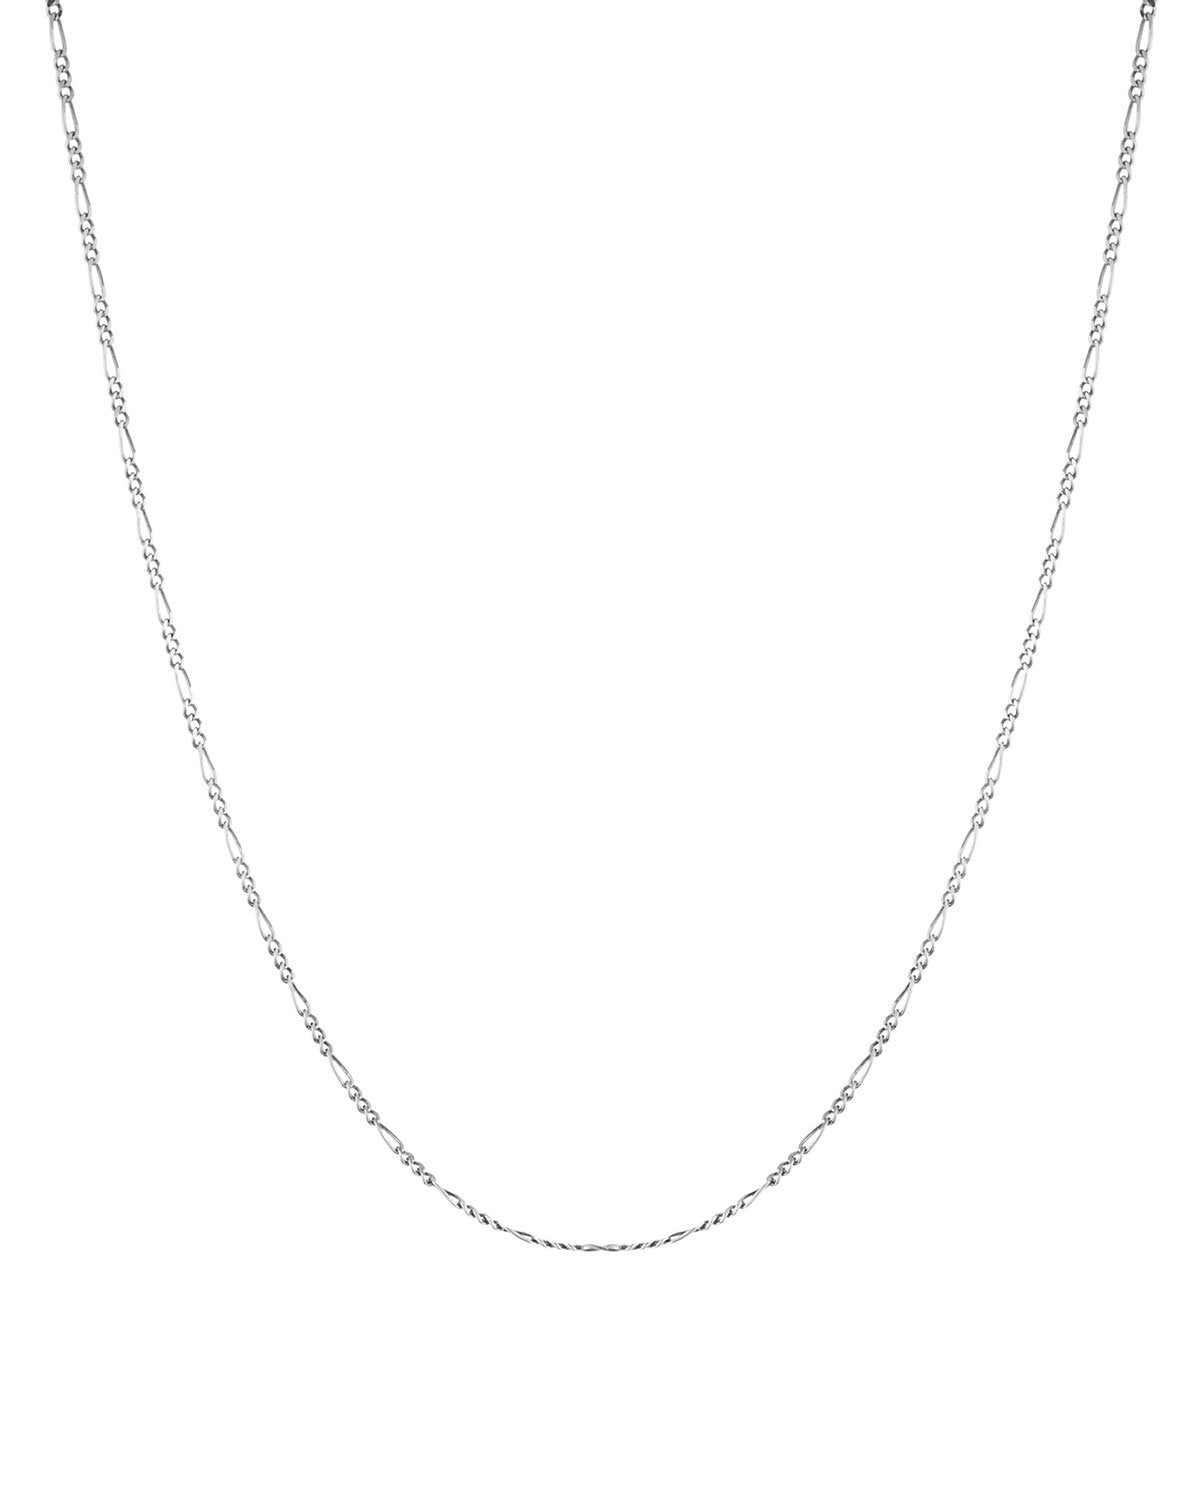 Figaro link chain (Sterling Silver) for layering by Sit &amp; Wonder